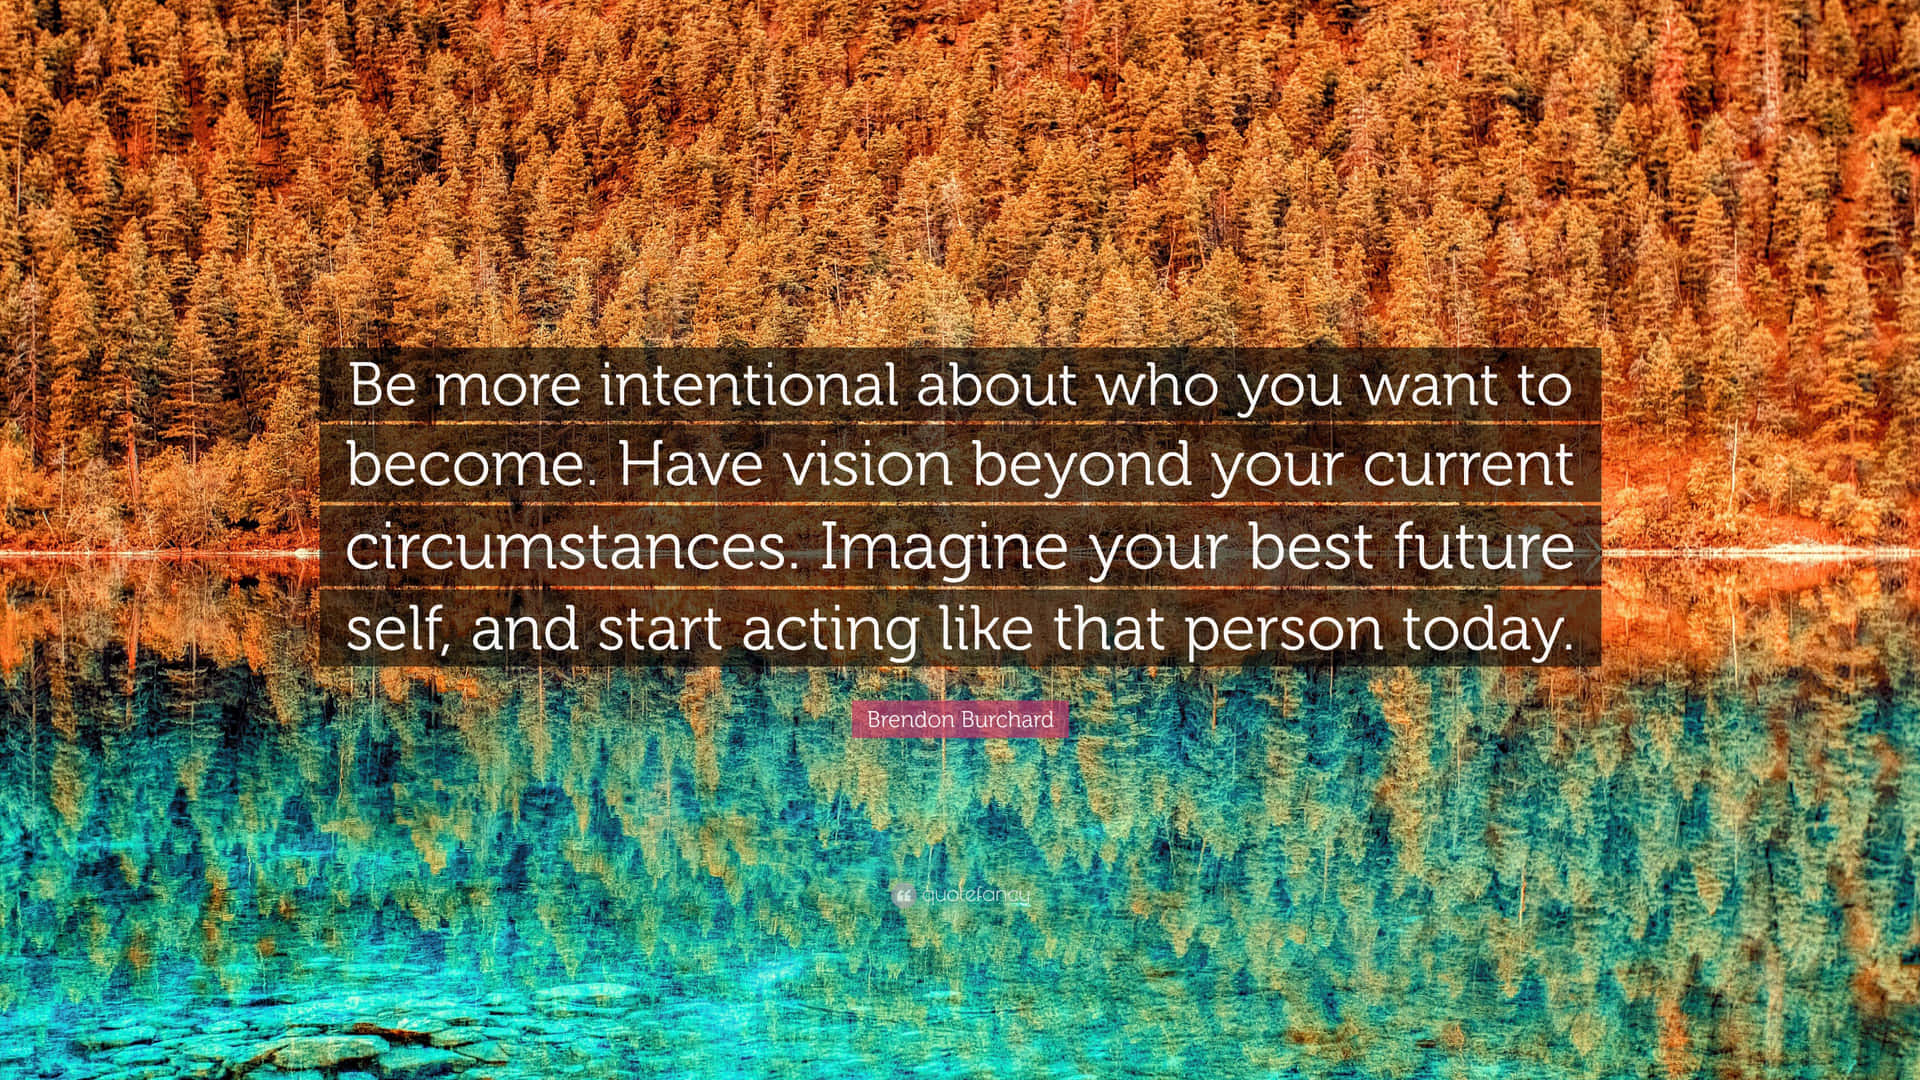 Intentional Quote - Brendon Burchard Wallpaper